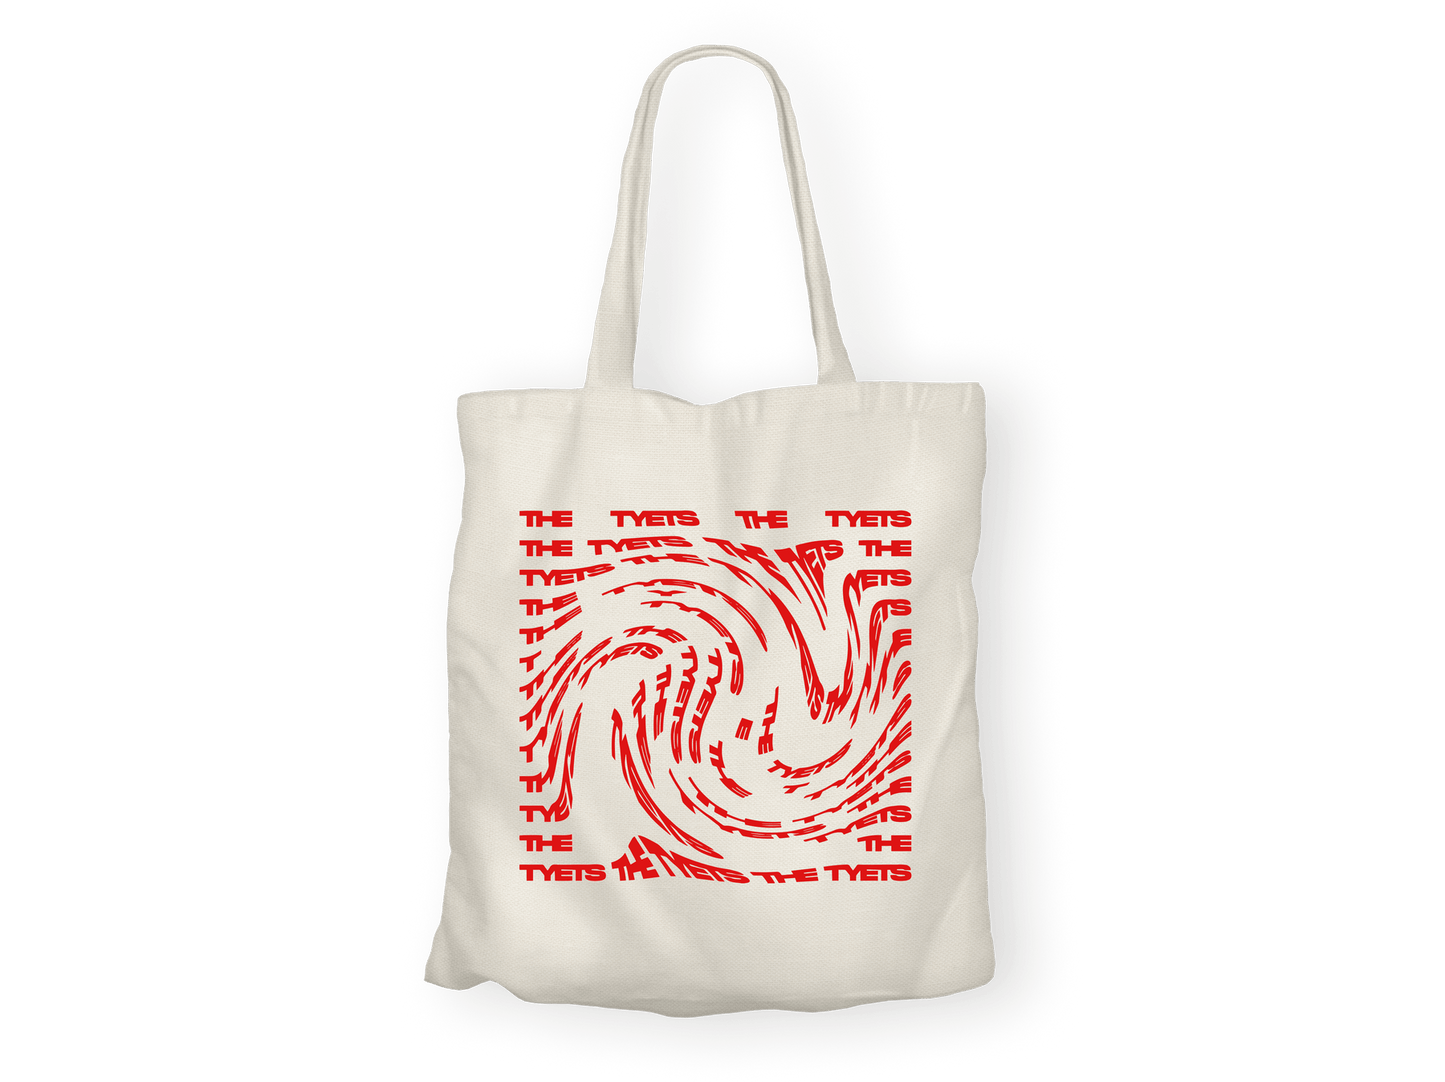 The Tyets - Totebag